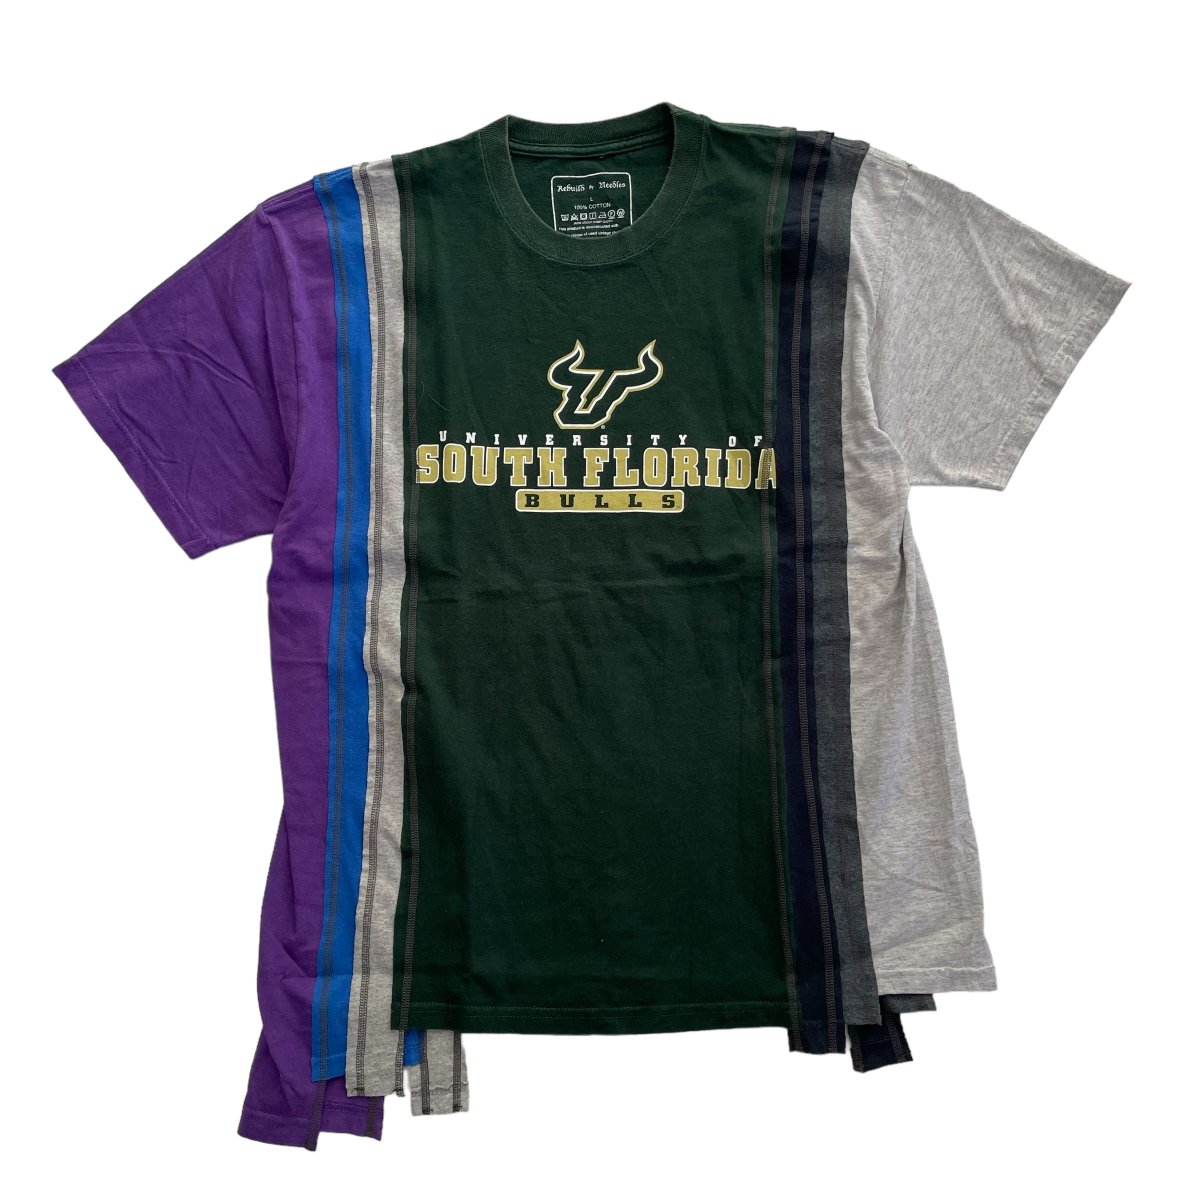 NEEDLES <BR>7 Cuts S/S Tee - College
